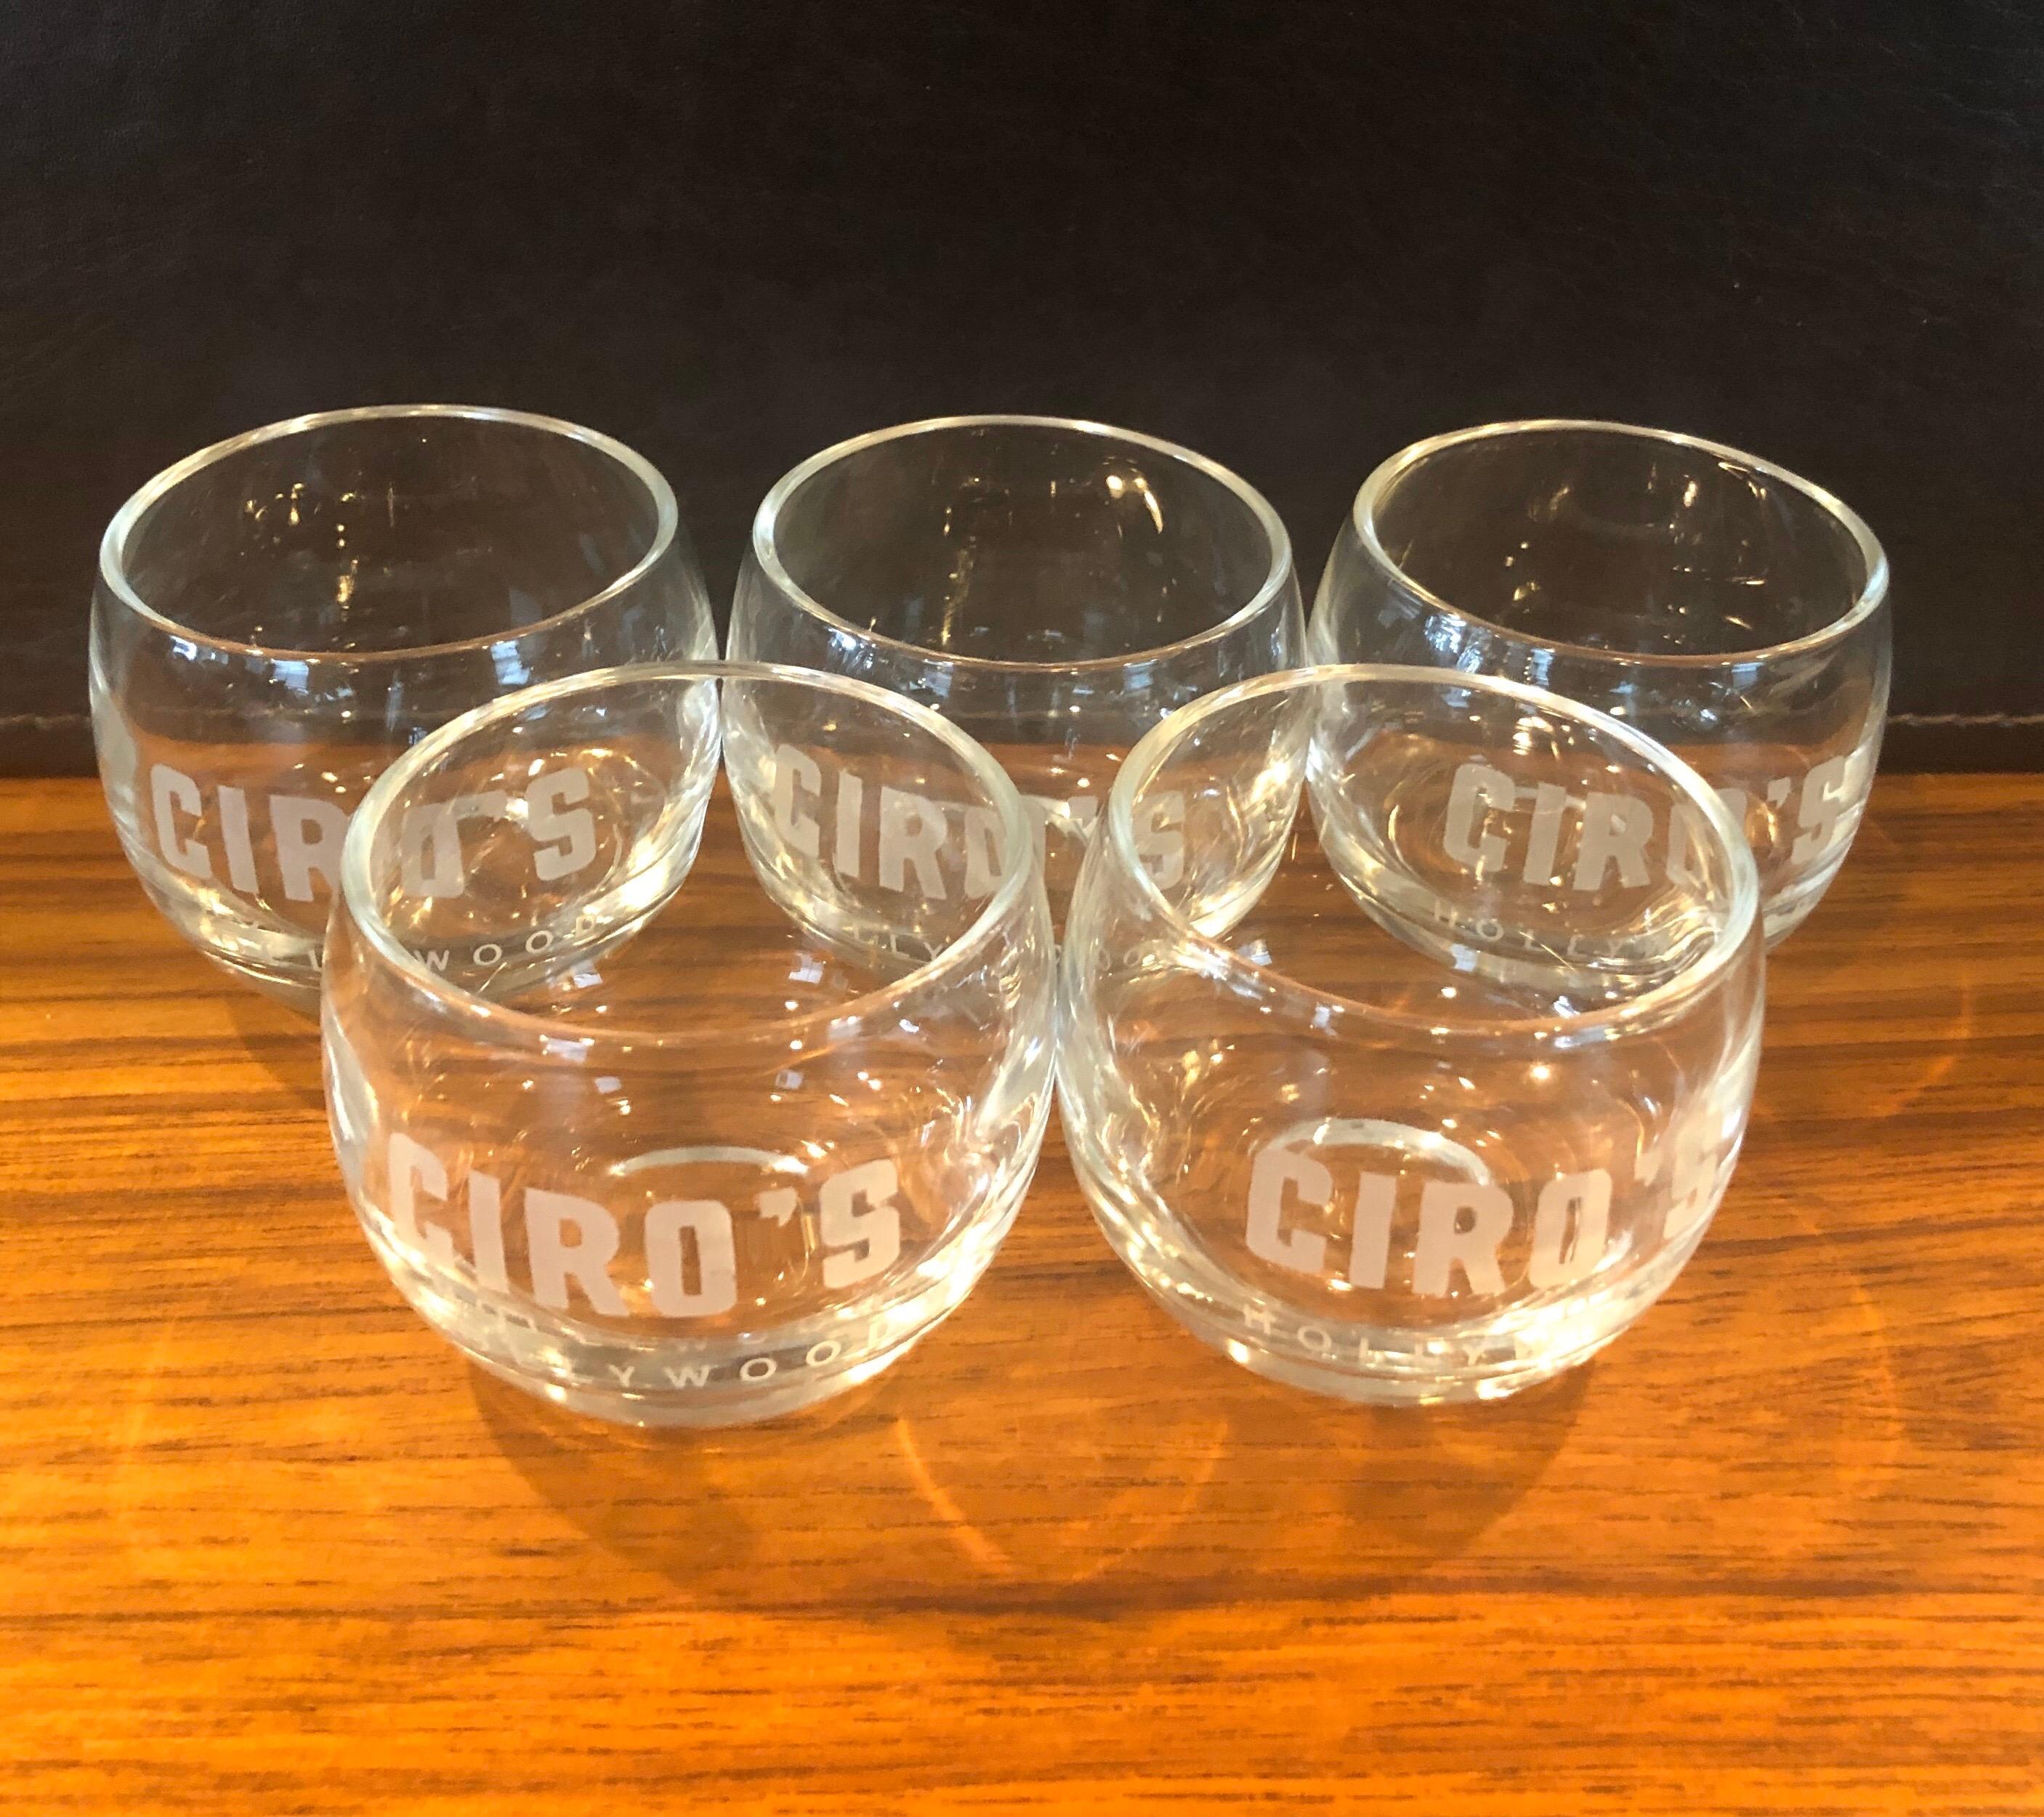 Great set of five old fashioned glasses (6oz) from Ciro's Hollywood, circa 1950s. These super rare cocktail glasses are round clear glass with 